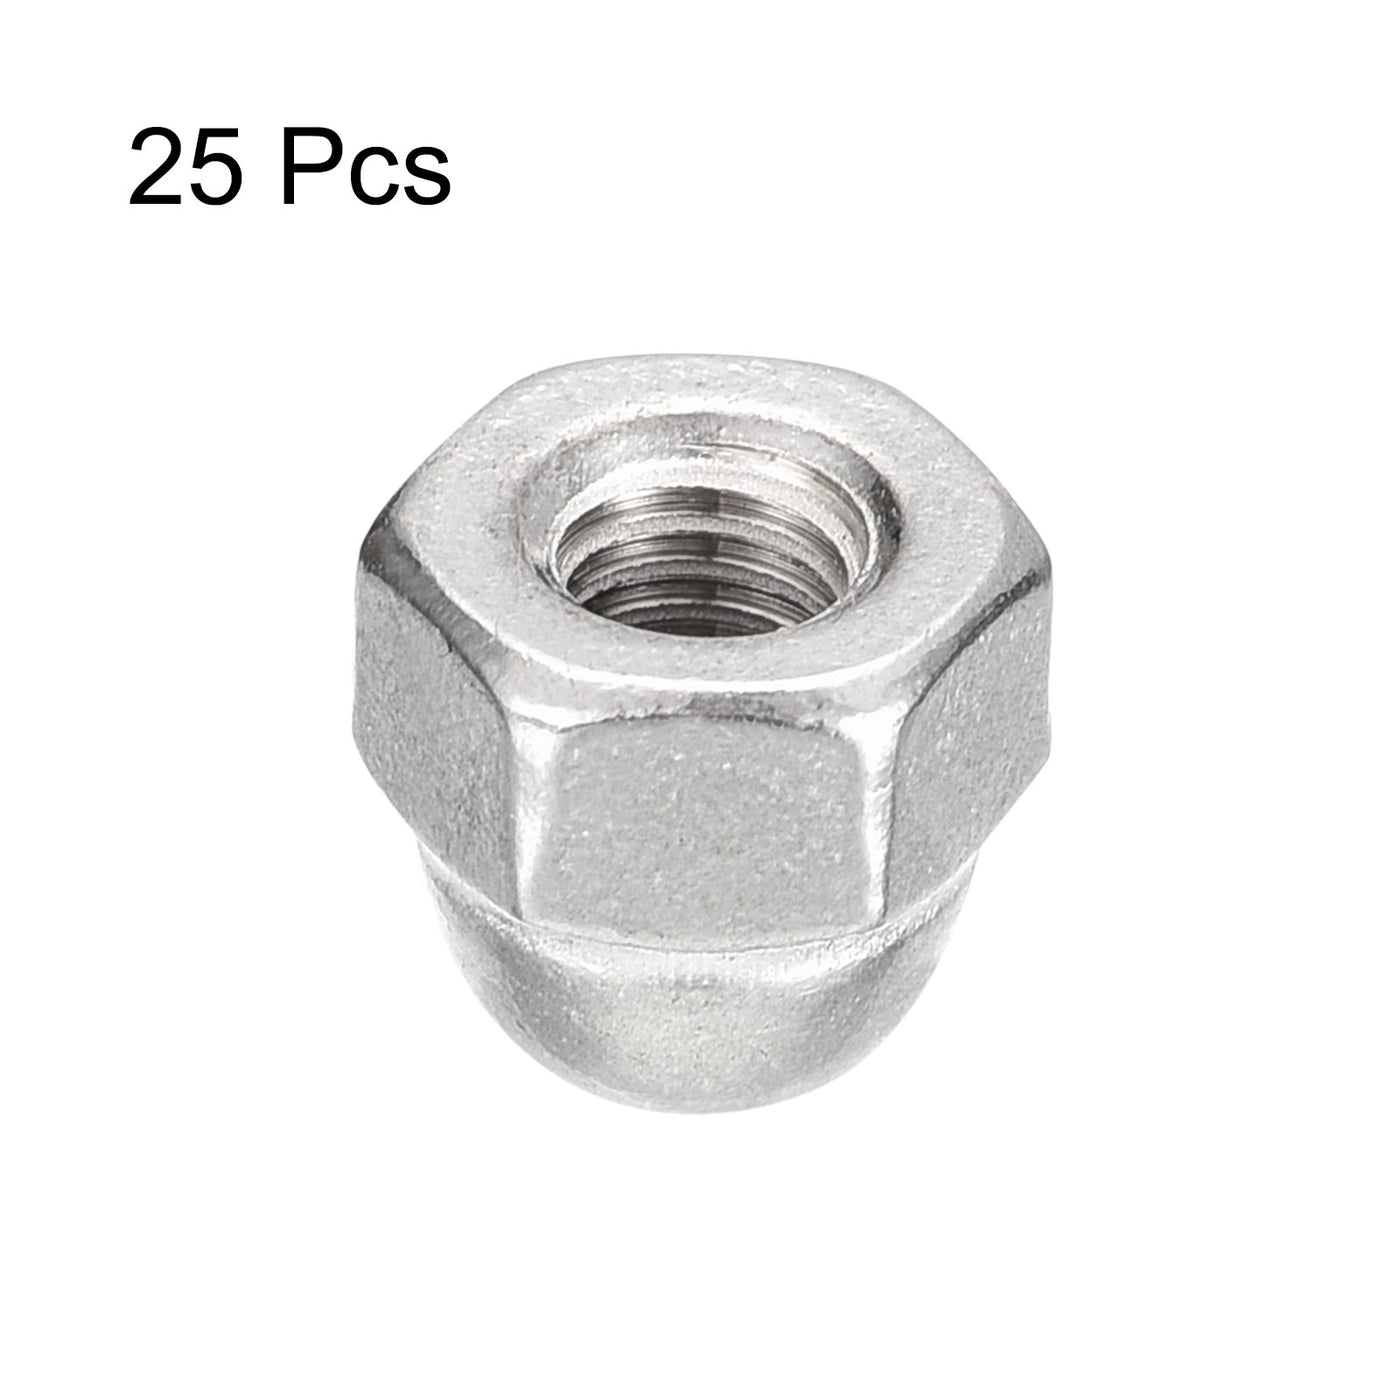 uxcell Uxcell #10-32 Acorn Cap Nuts,25pcs - 304 Stainless Steel Hardware Nuts, Acorn Hex Cap Dome Head Nuts for Fasteners (Silver)